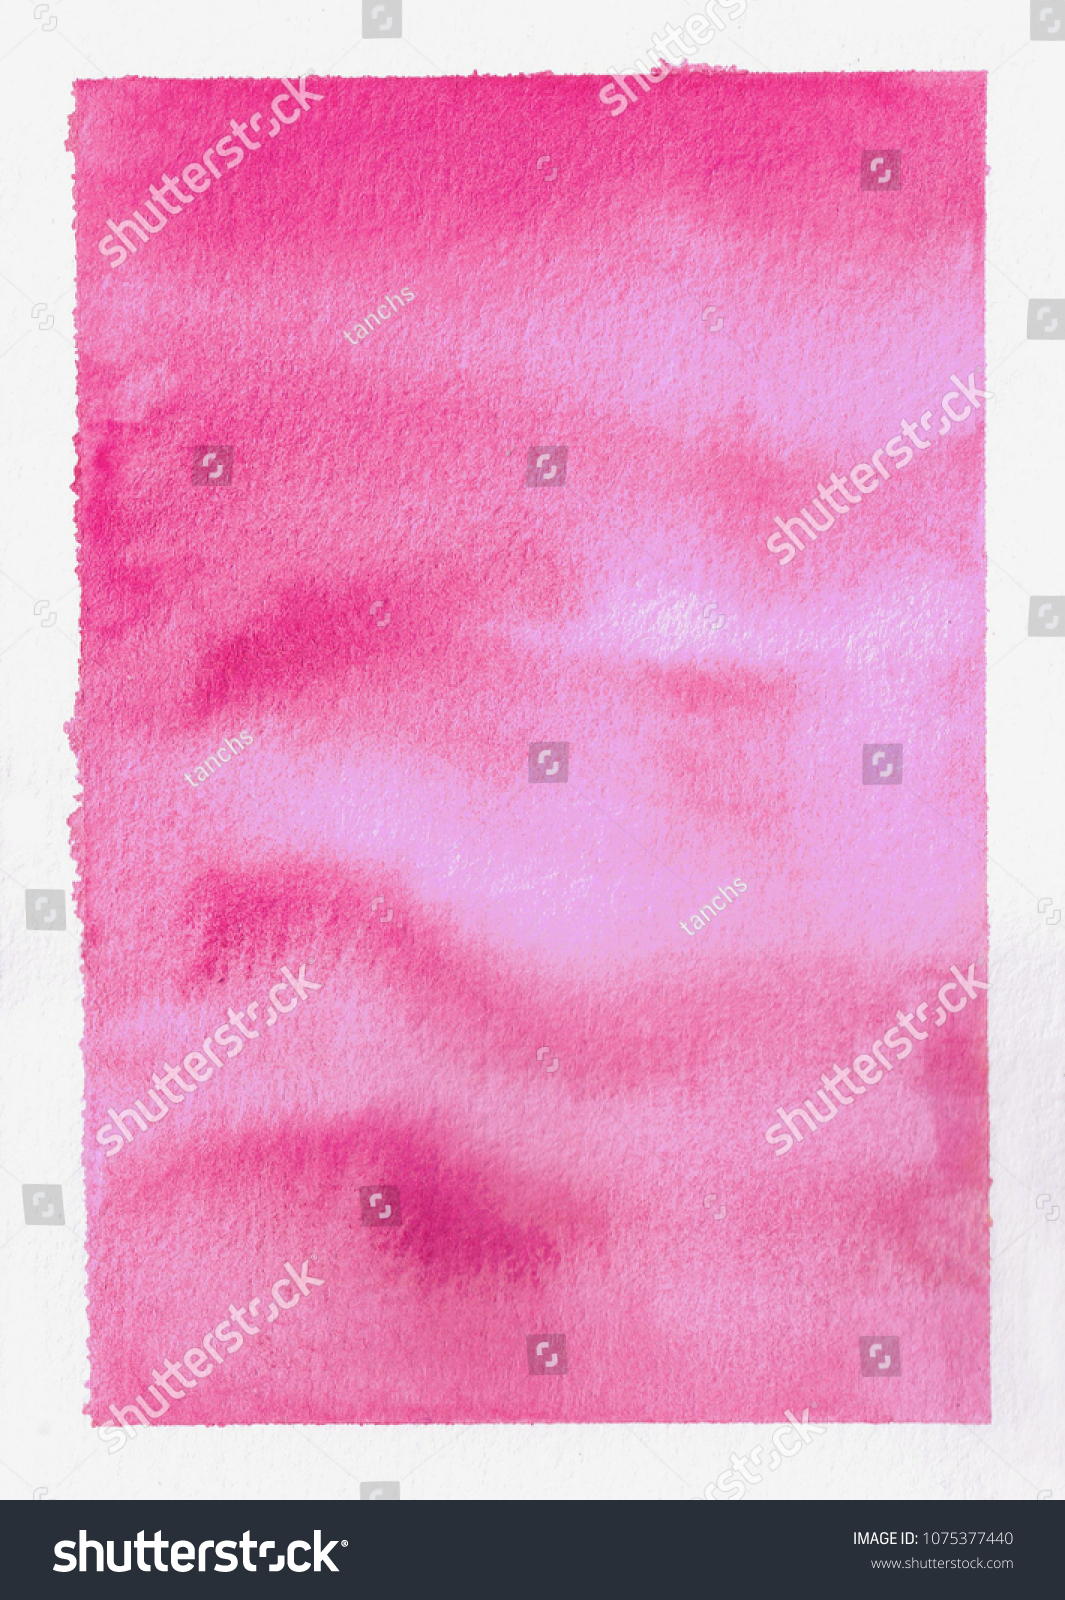 beautiful dreamy hand painted hazy pink watercolor in a square shape, isolated on white background, fine textured paper #1075377440